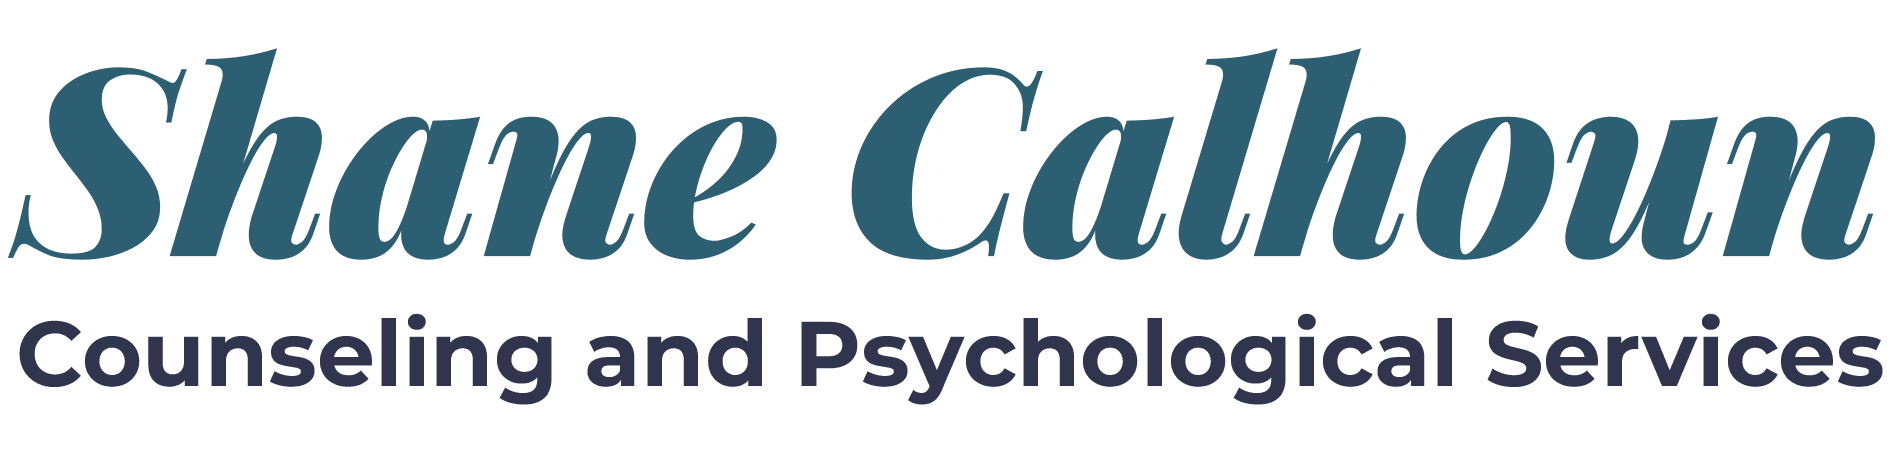 Shane Calhoun Counseling and Psychological Service